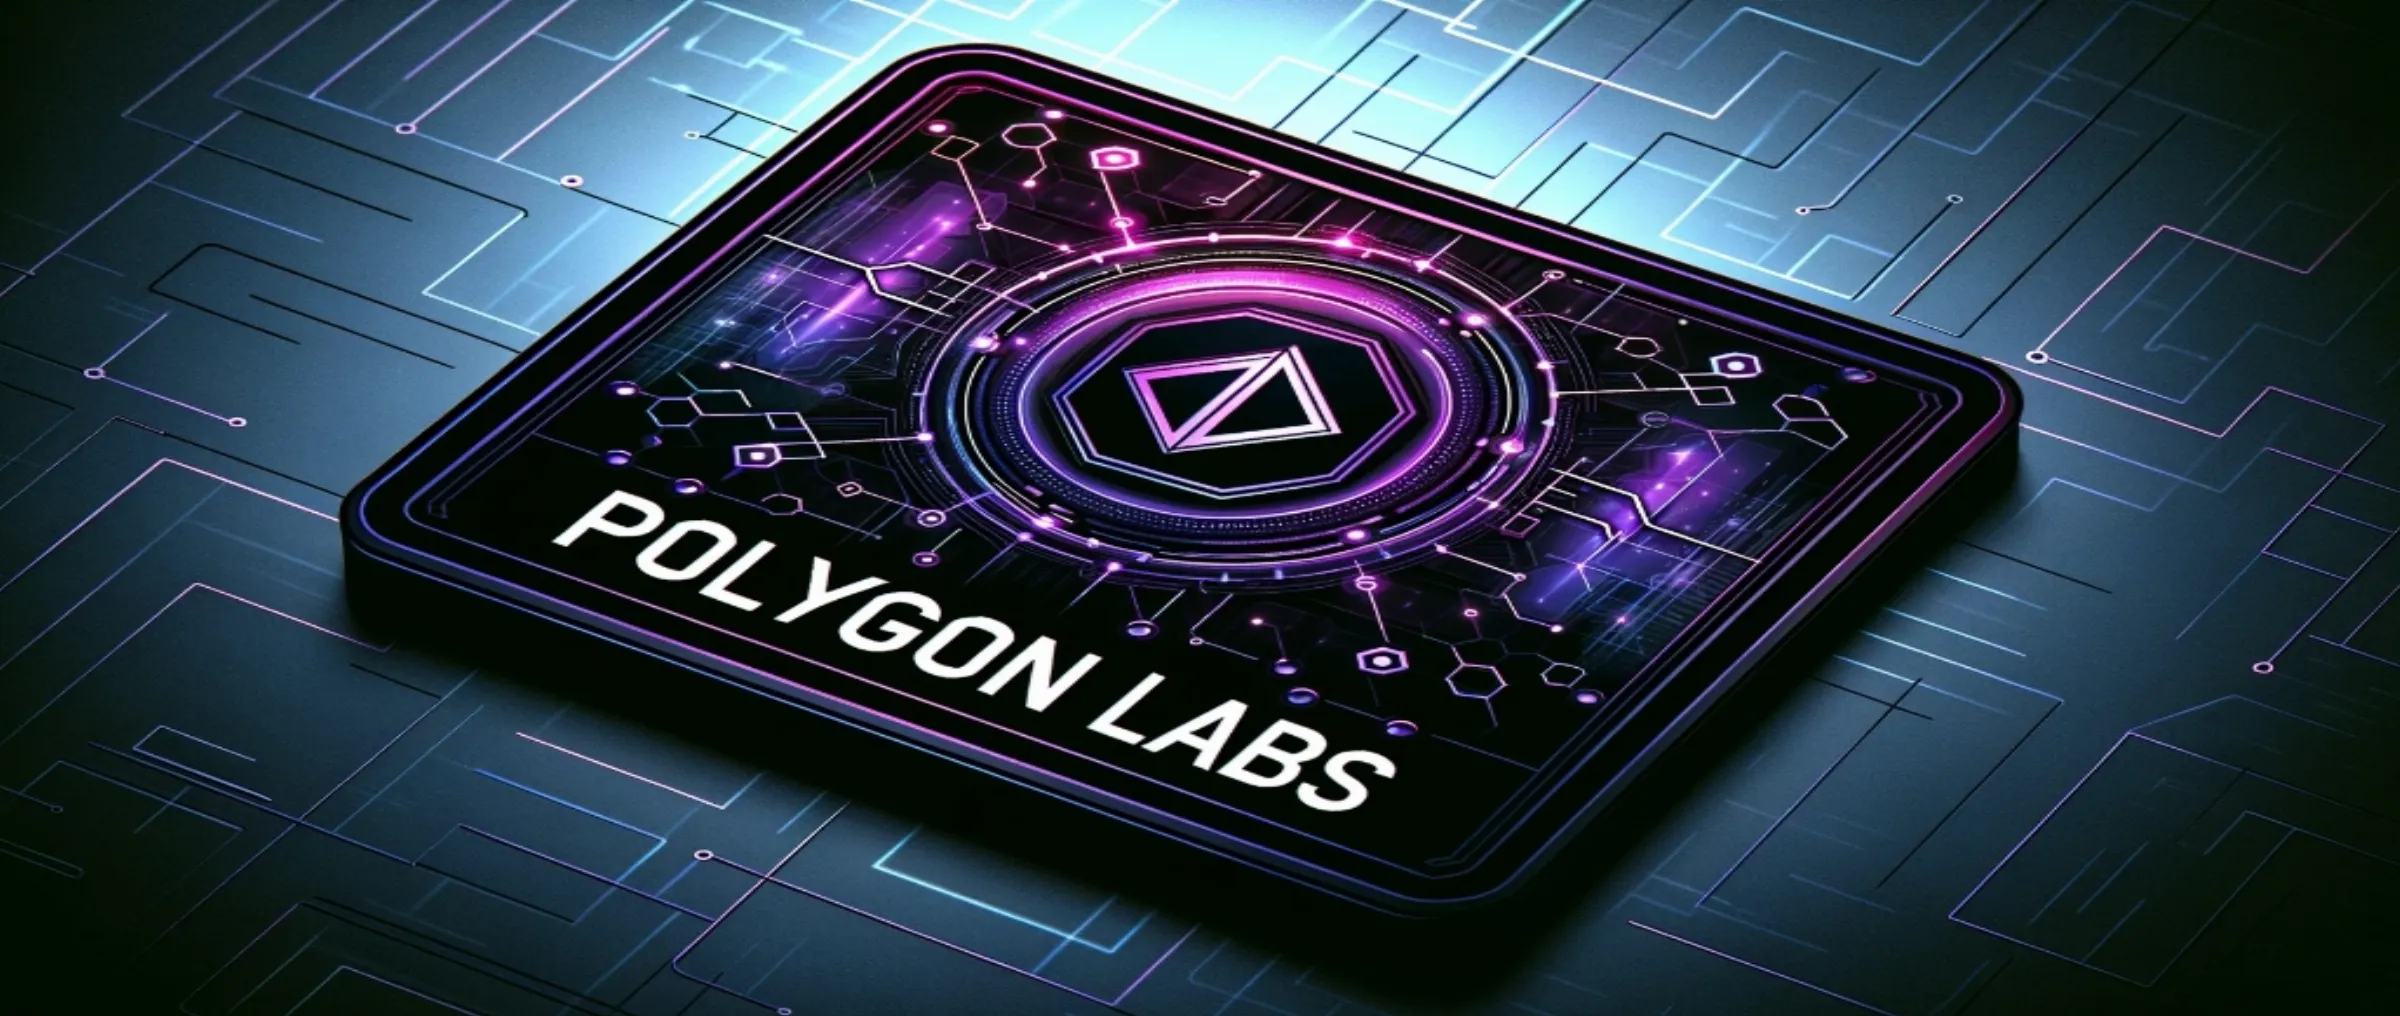 Polygon Labs has cut 19% of its employees